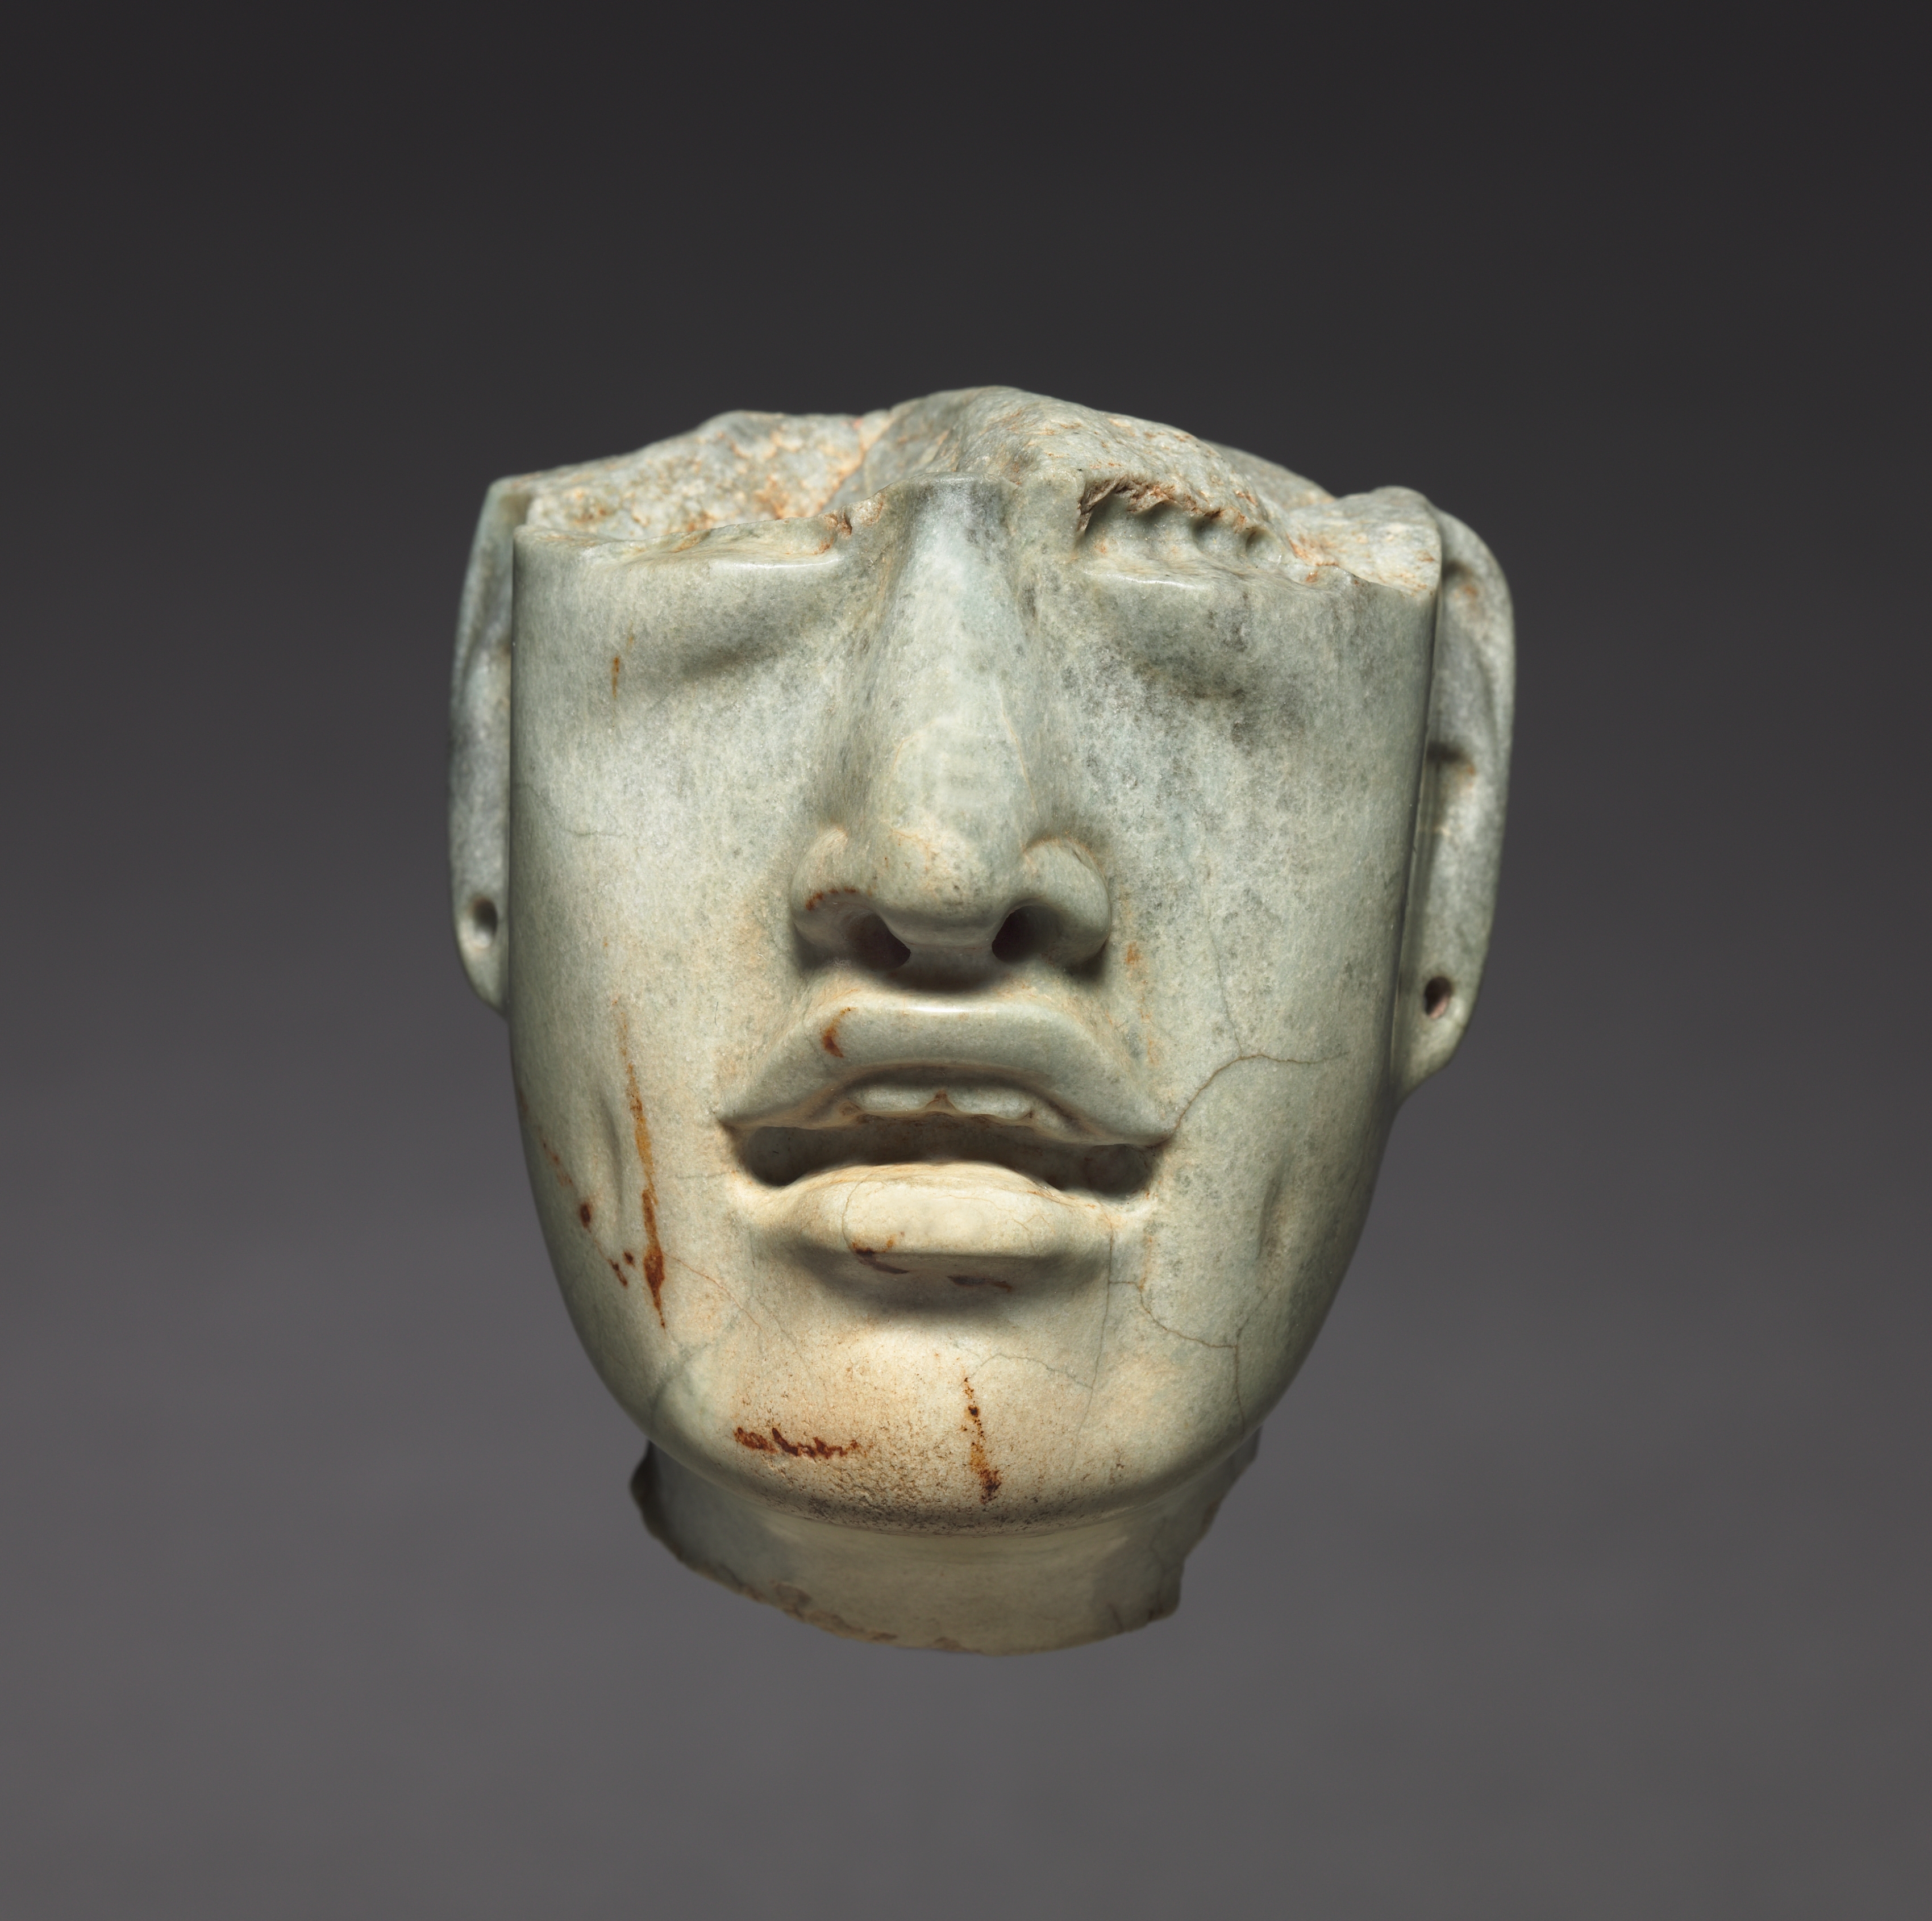 Head Fragment by Unknown Artist - c. 900-300 BC - 7.4 x 6.2 x 5 cm Cleveland Museum of Art